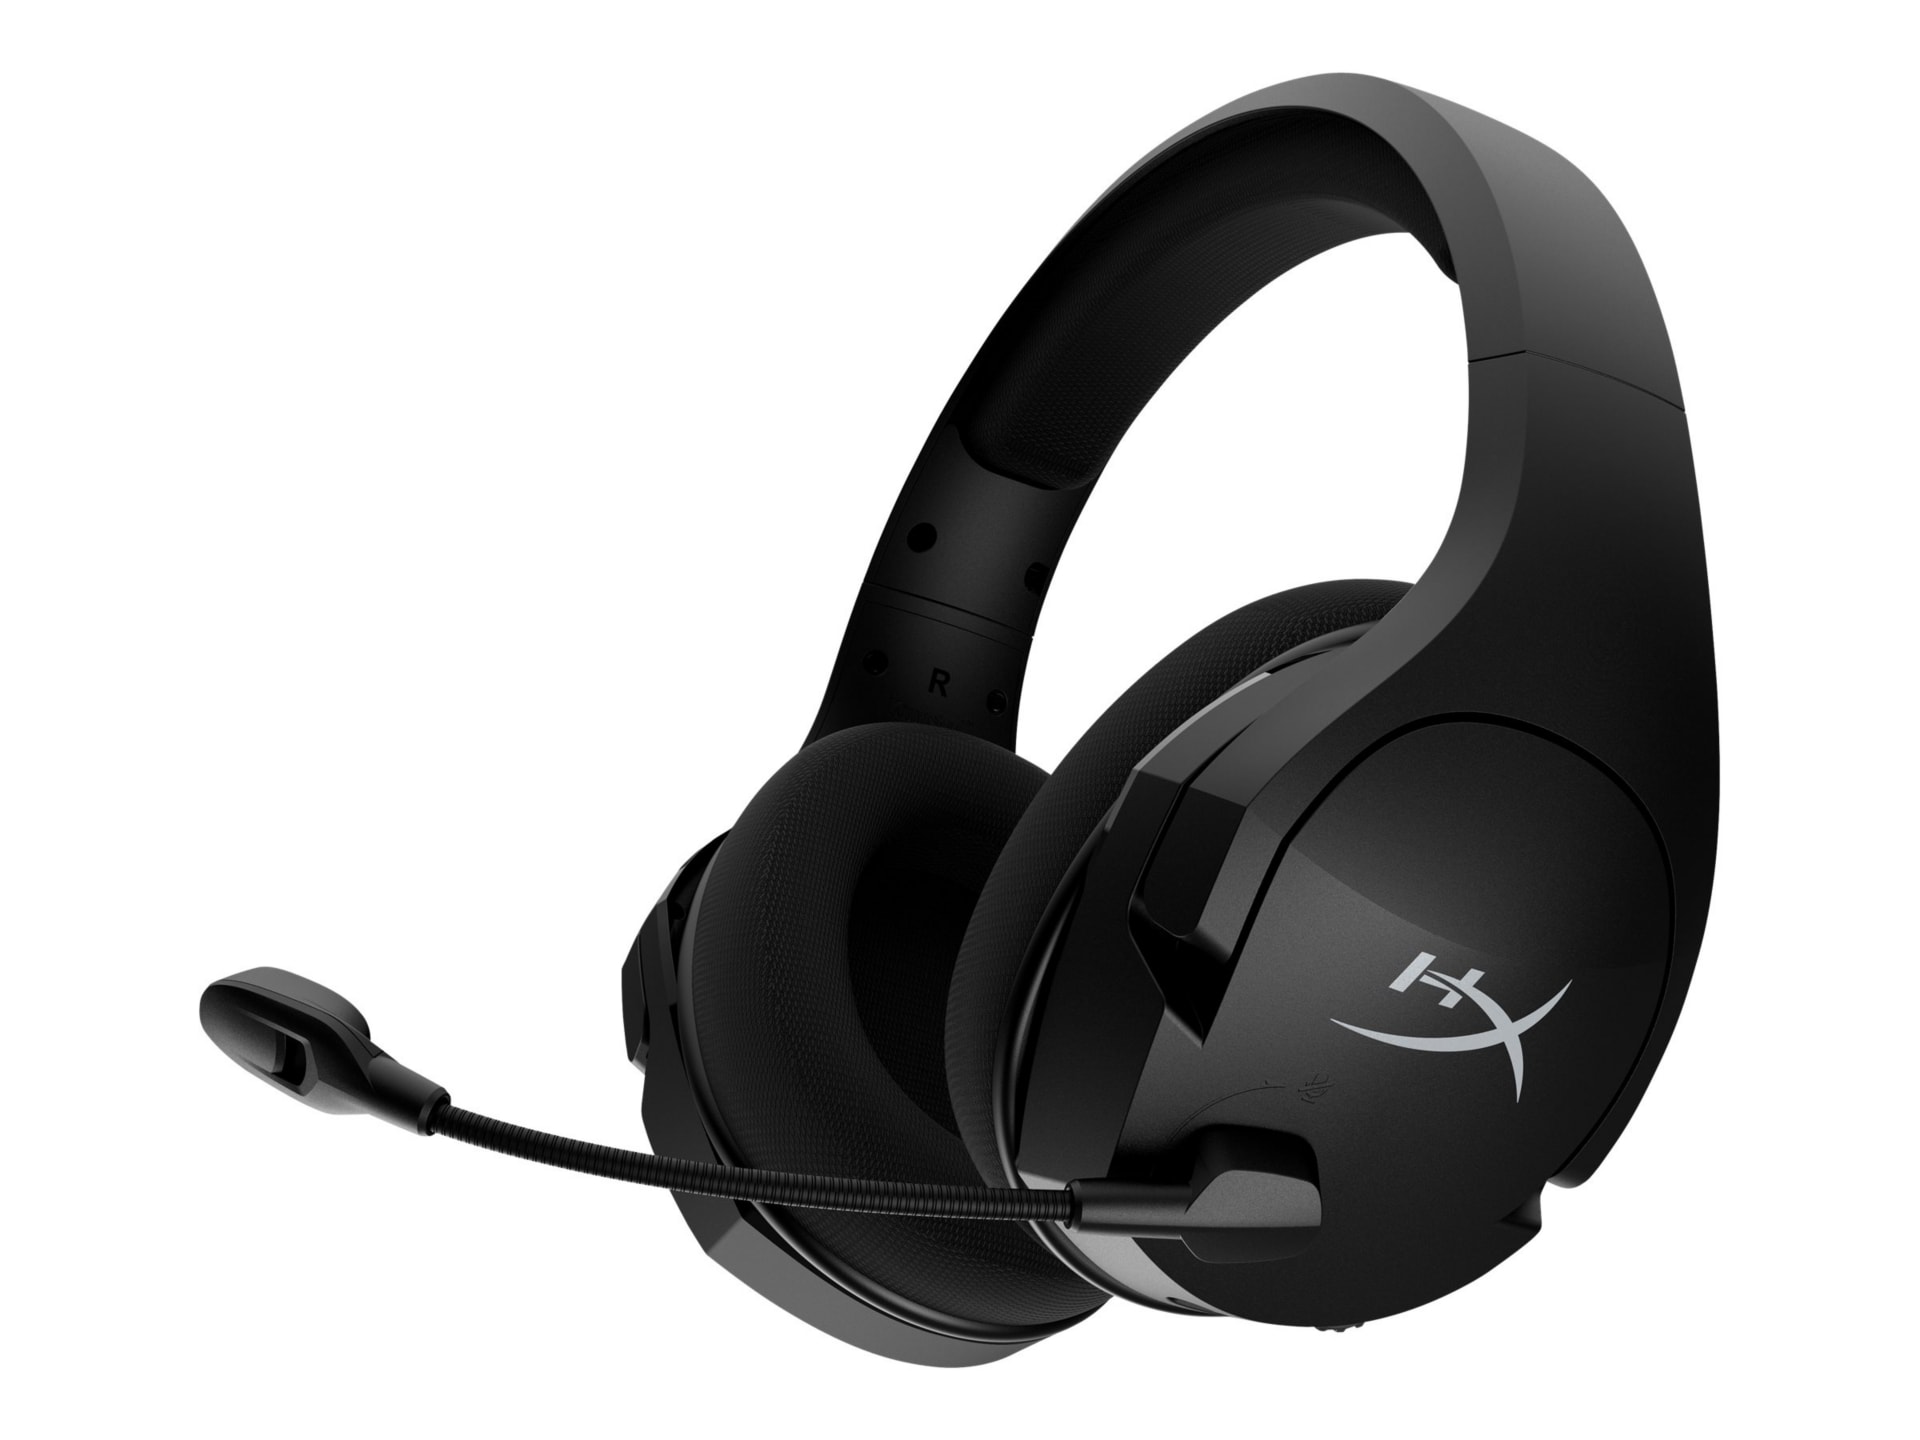  HyperX Cloud Stinger Core - Gaming Headset for